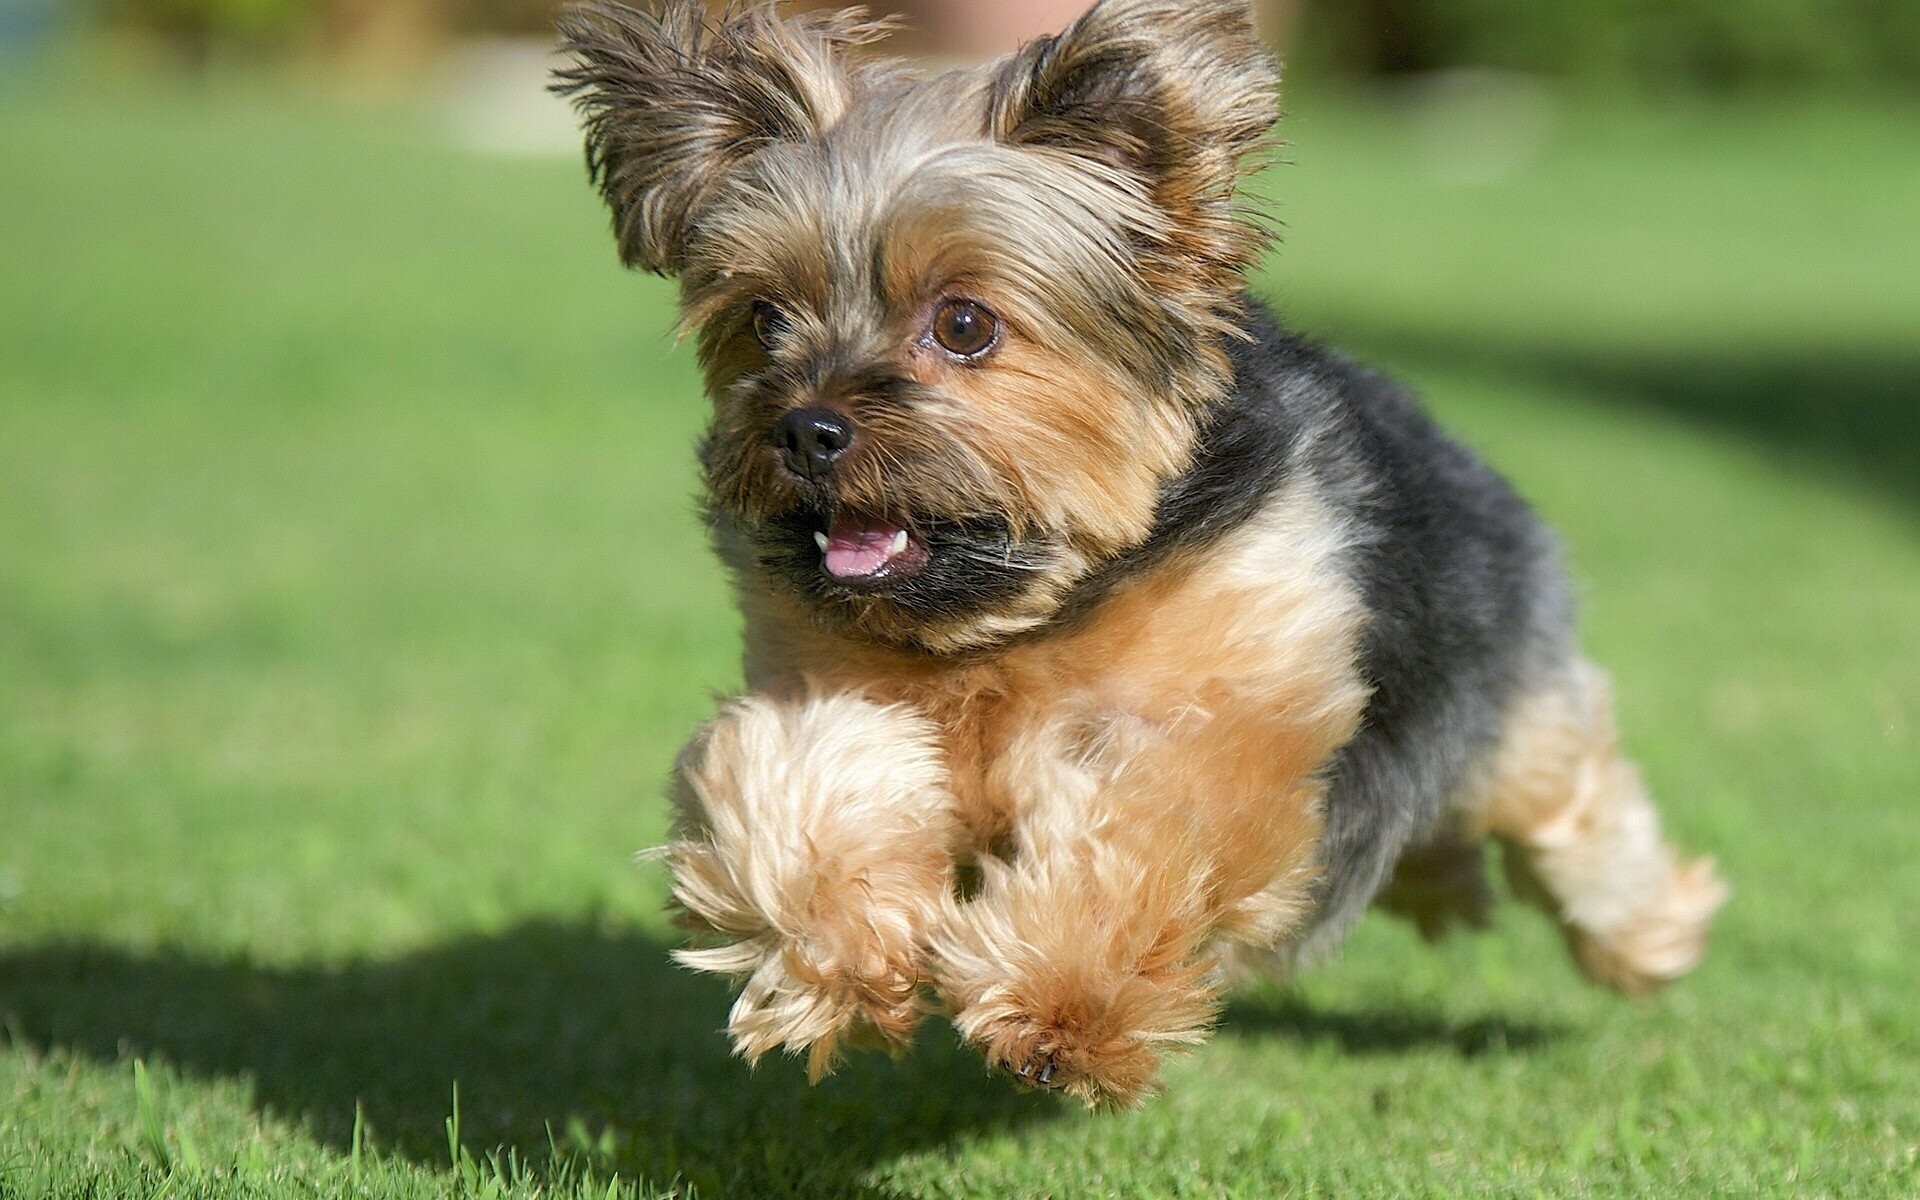 Yorkshire Terrier: Very playful and energetic dogs, Park, Lawn, Doggie. 1920x1200 HD Background.